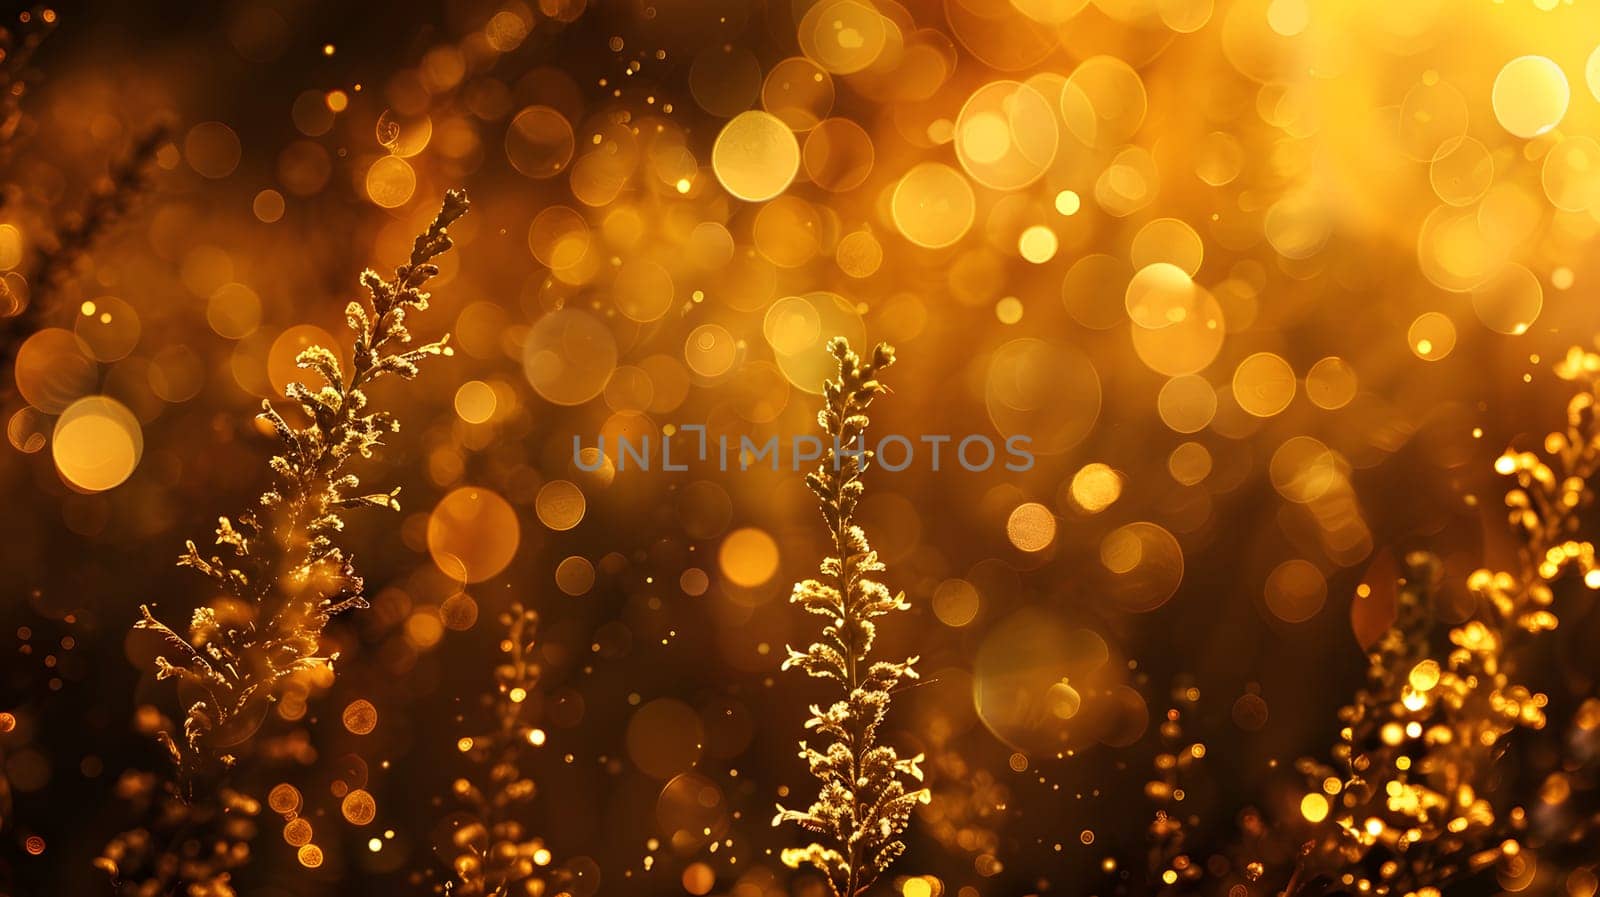 A golden sun shines through the trees onto a field of flowers, creating a blurry image of a natural landscape with amber hues and a hint of winter in the air